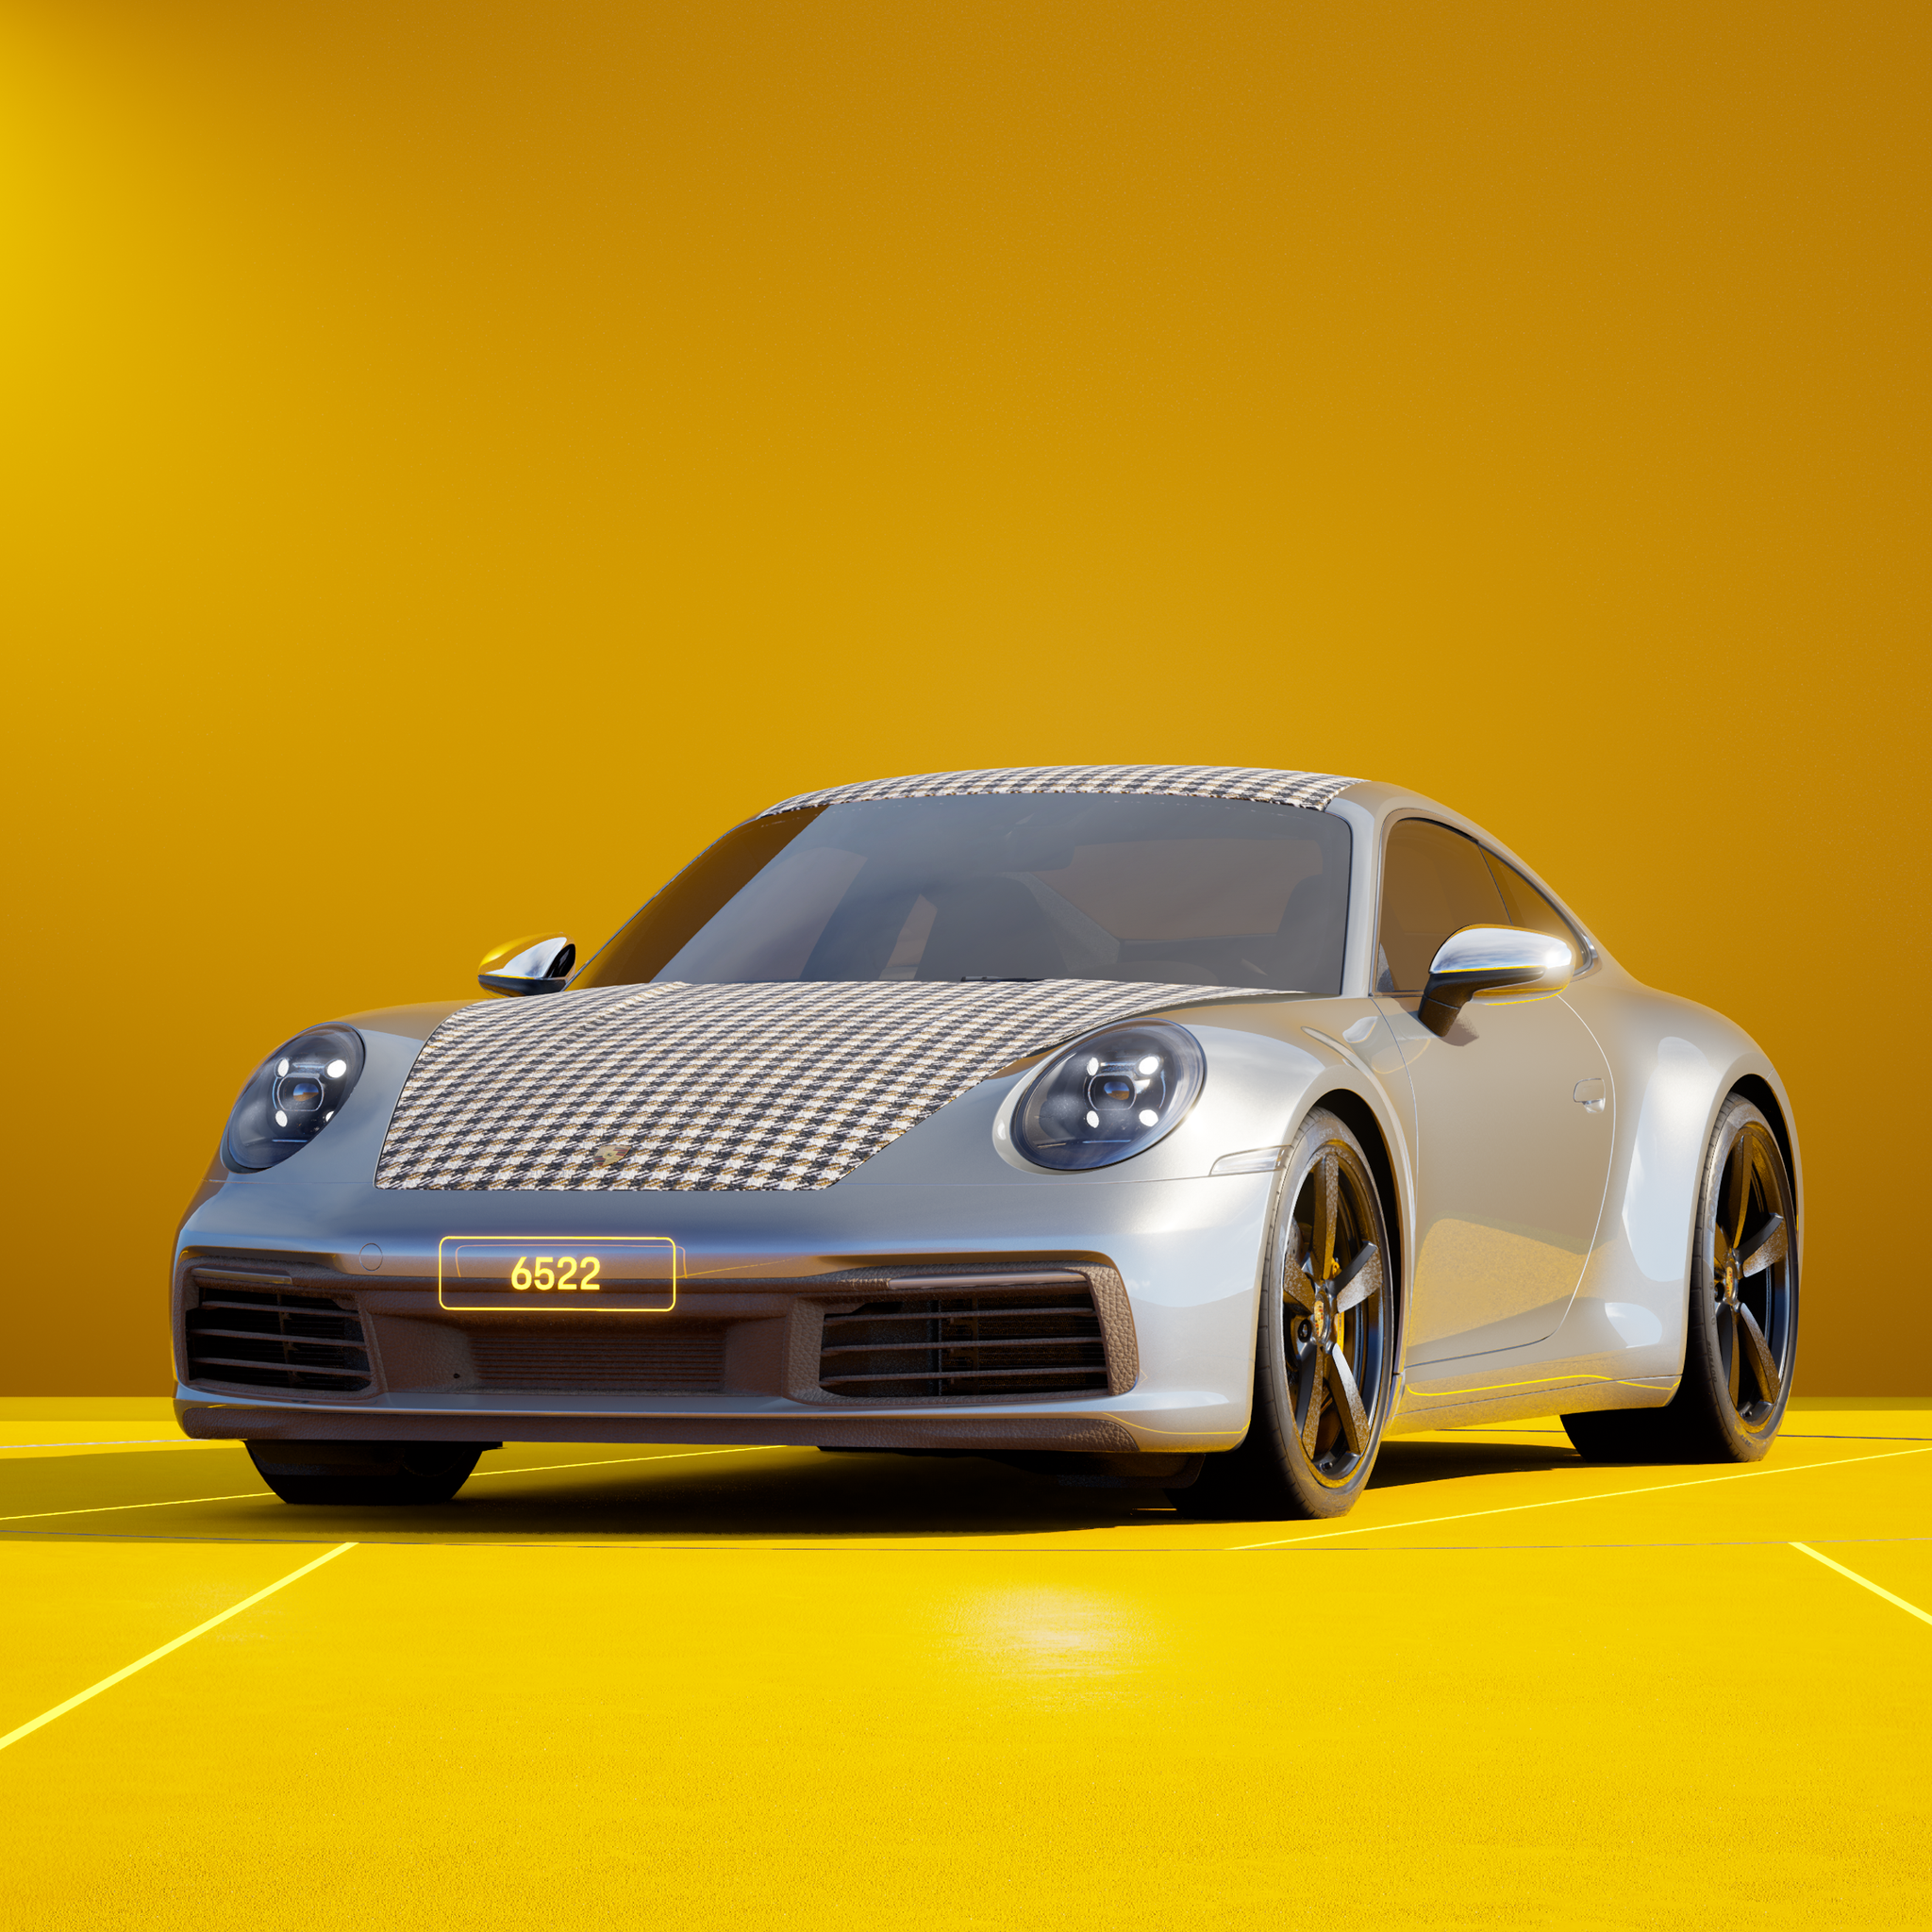 The PORSCHΞ 911 6522 image in phase